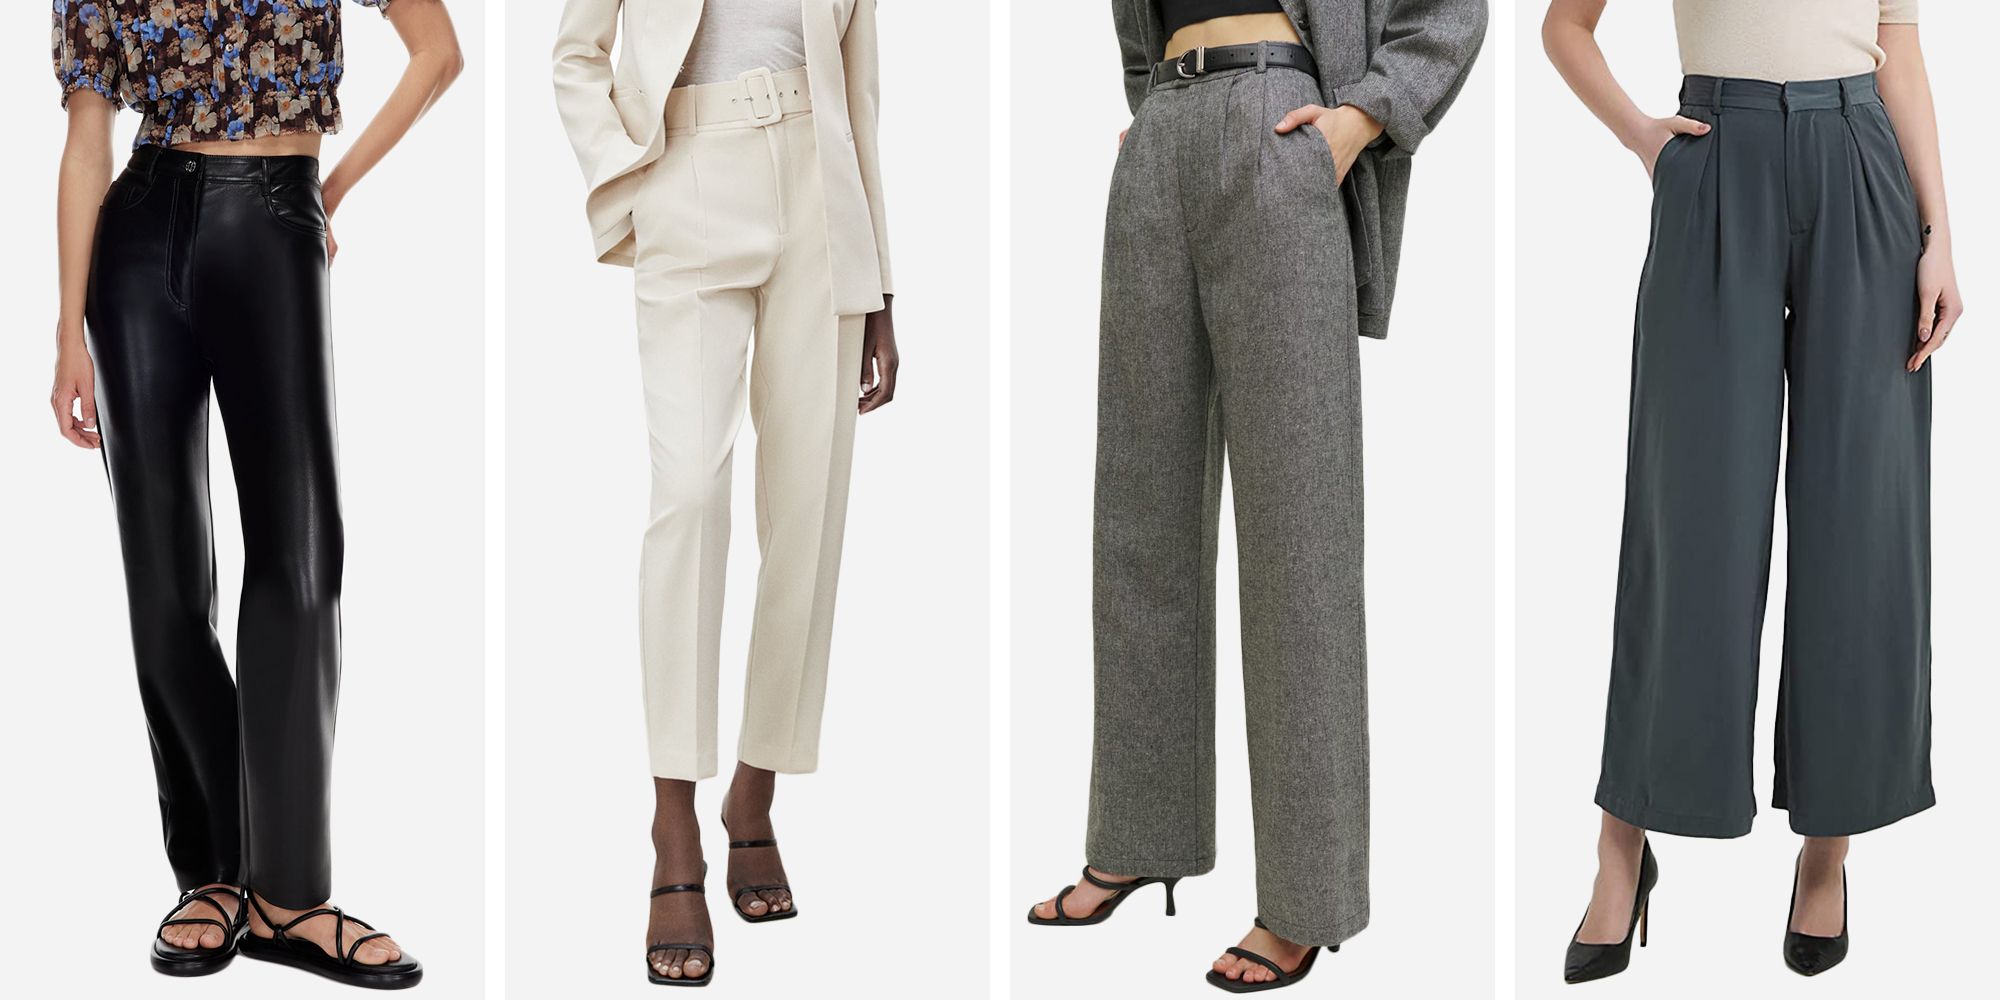 Versace Wool Low-rise Flared Pants in Black Womens Clothing Trousers Slacks and Chinos Full-length trousers 